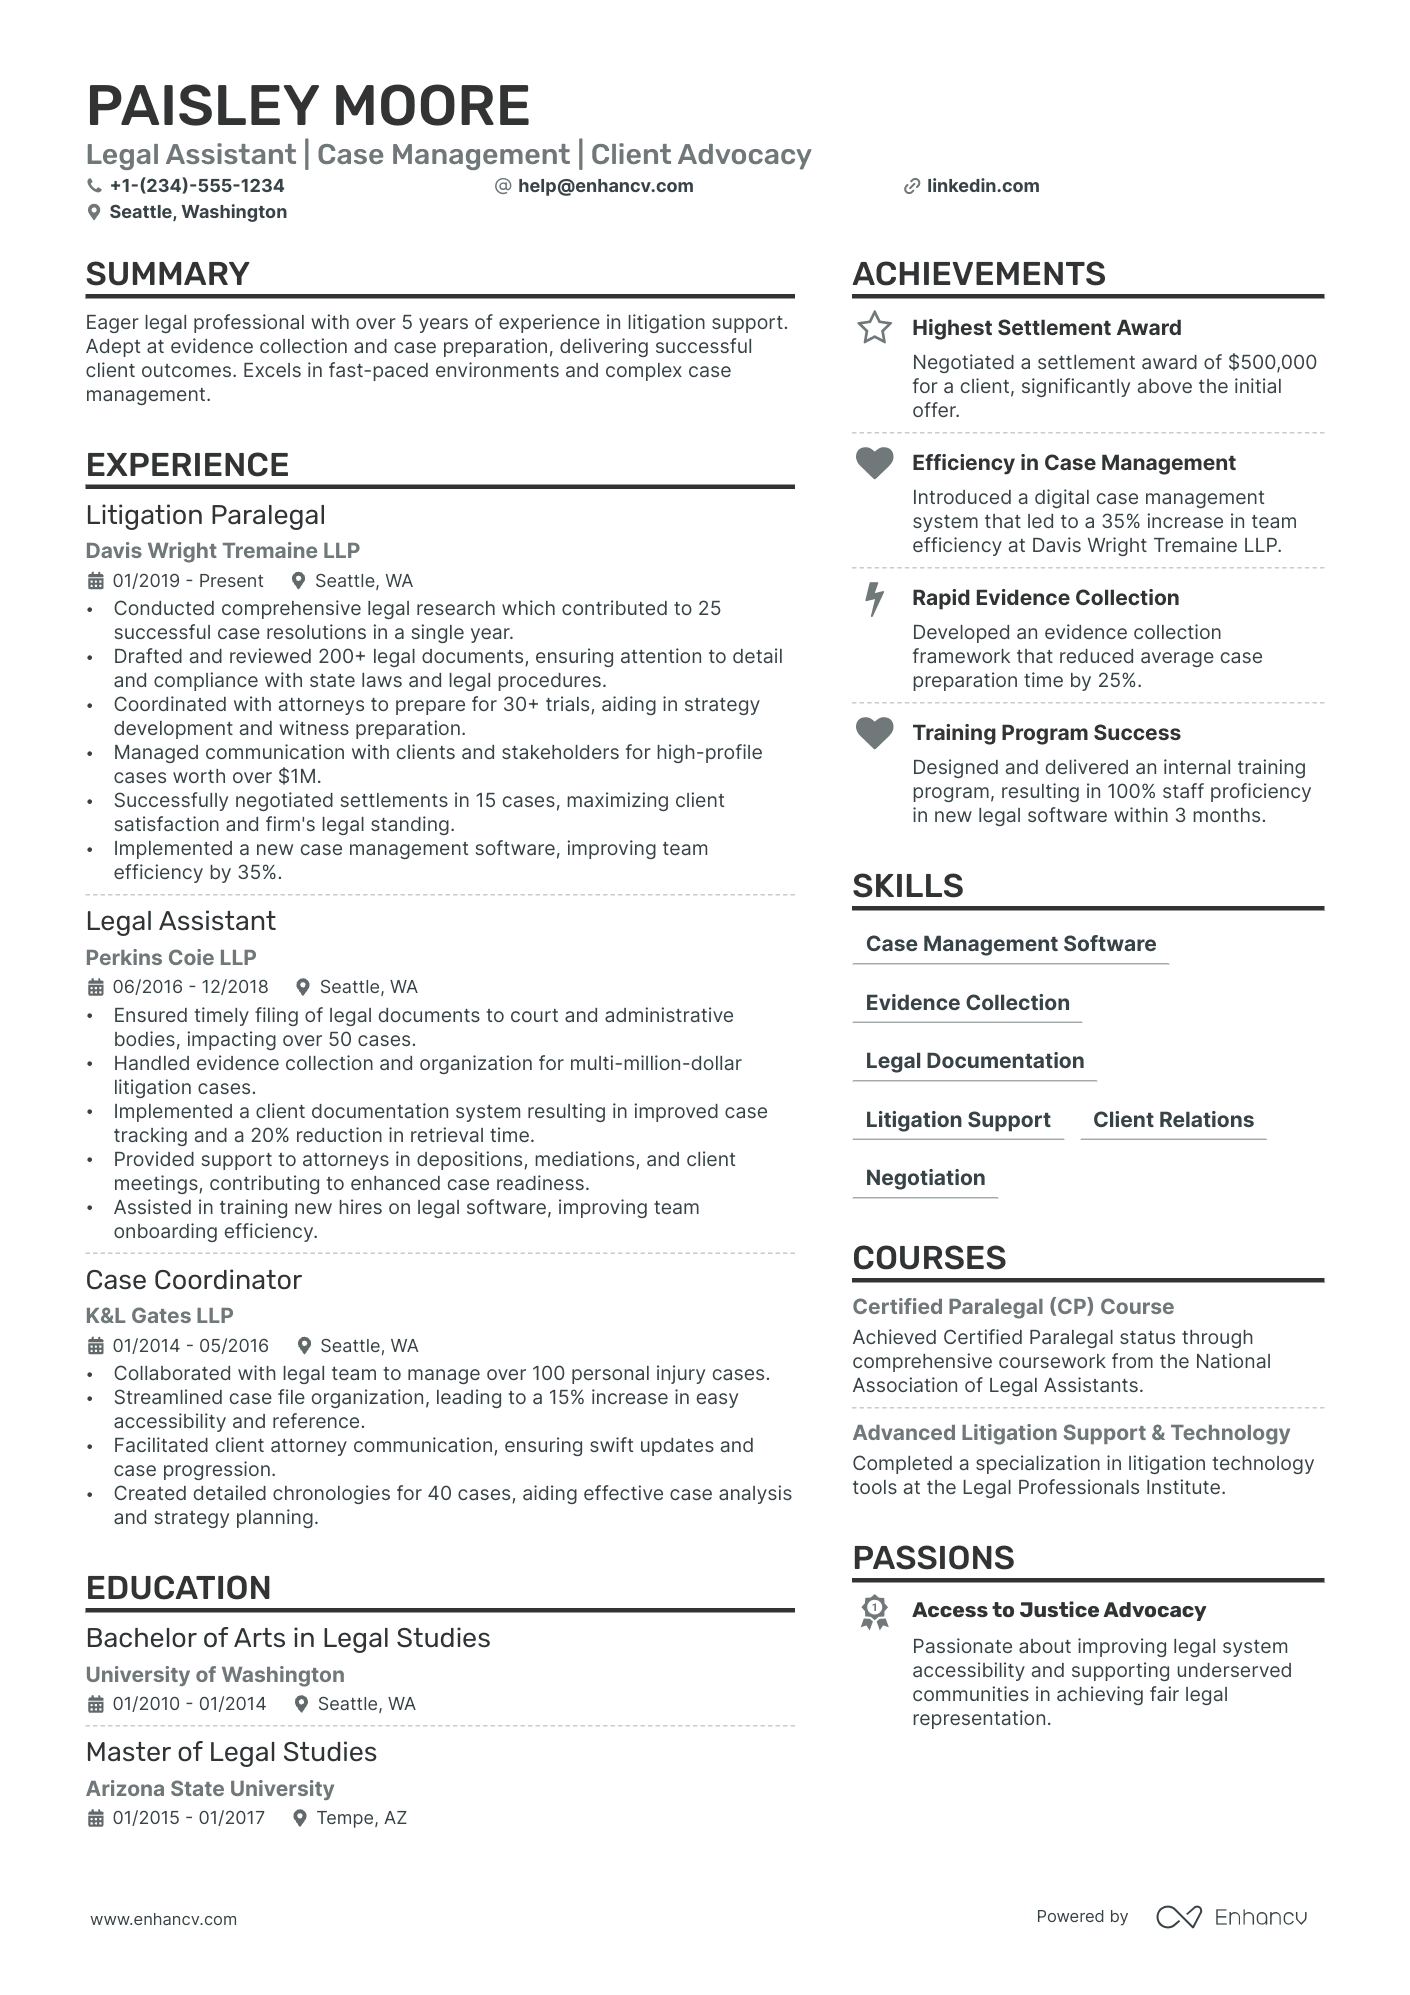 resume examples in healthcare